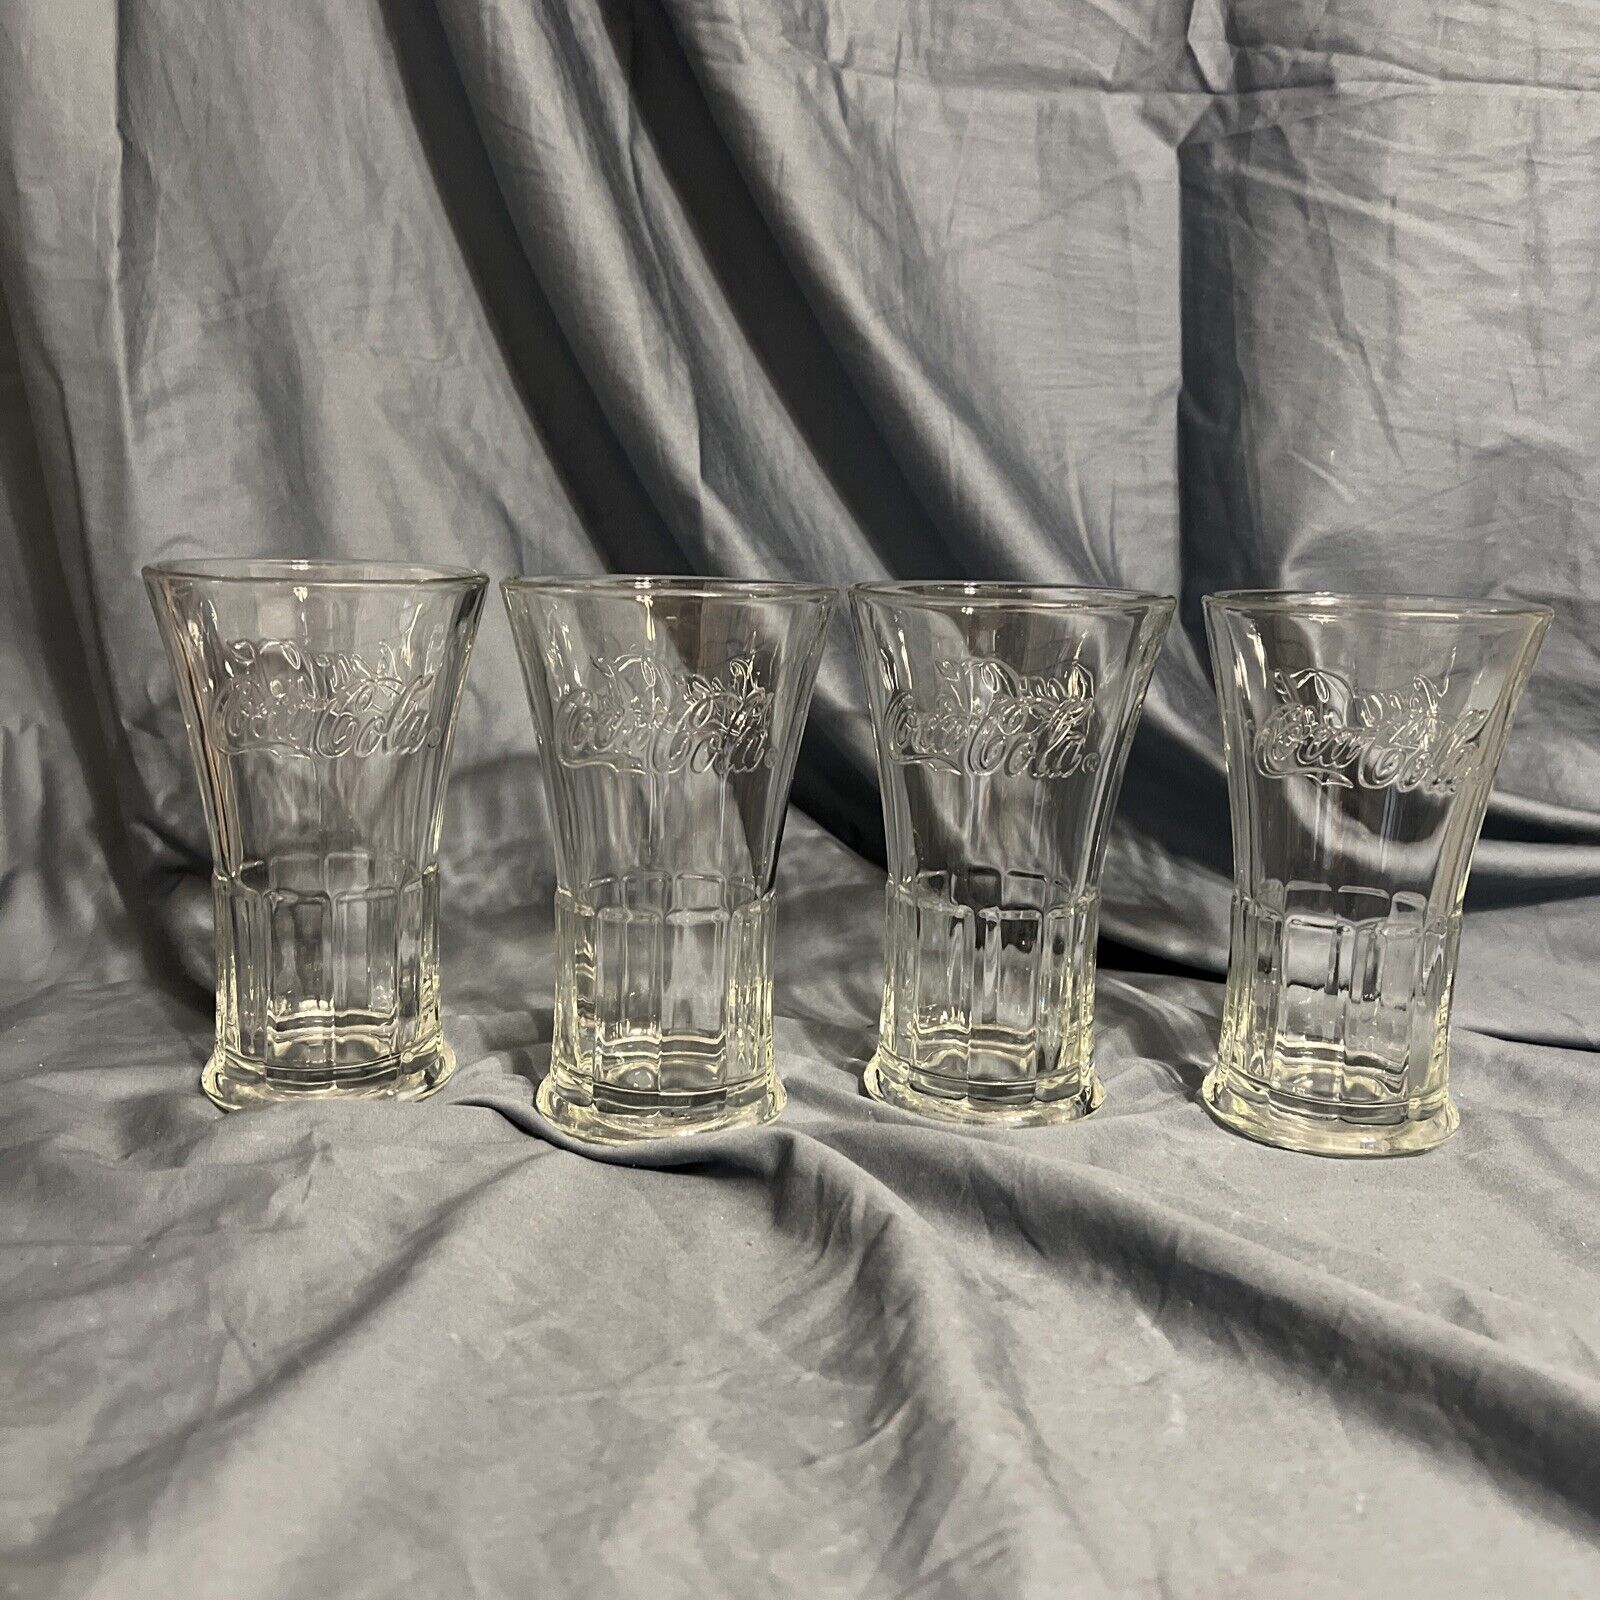 Libbey Coca Cola Set of 4 Flared Wide Mouth Glass Tumbler 16 oz Glass Coke